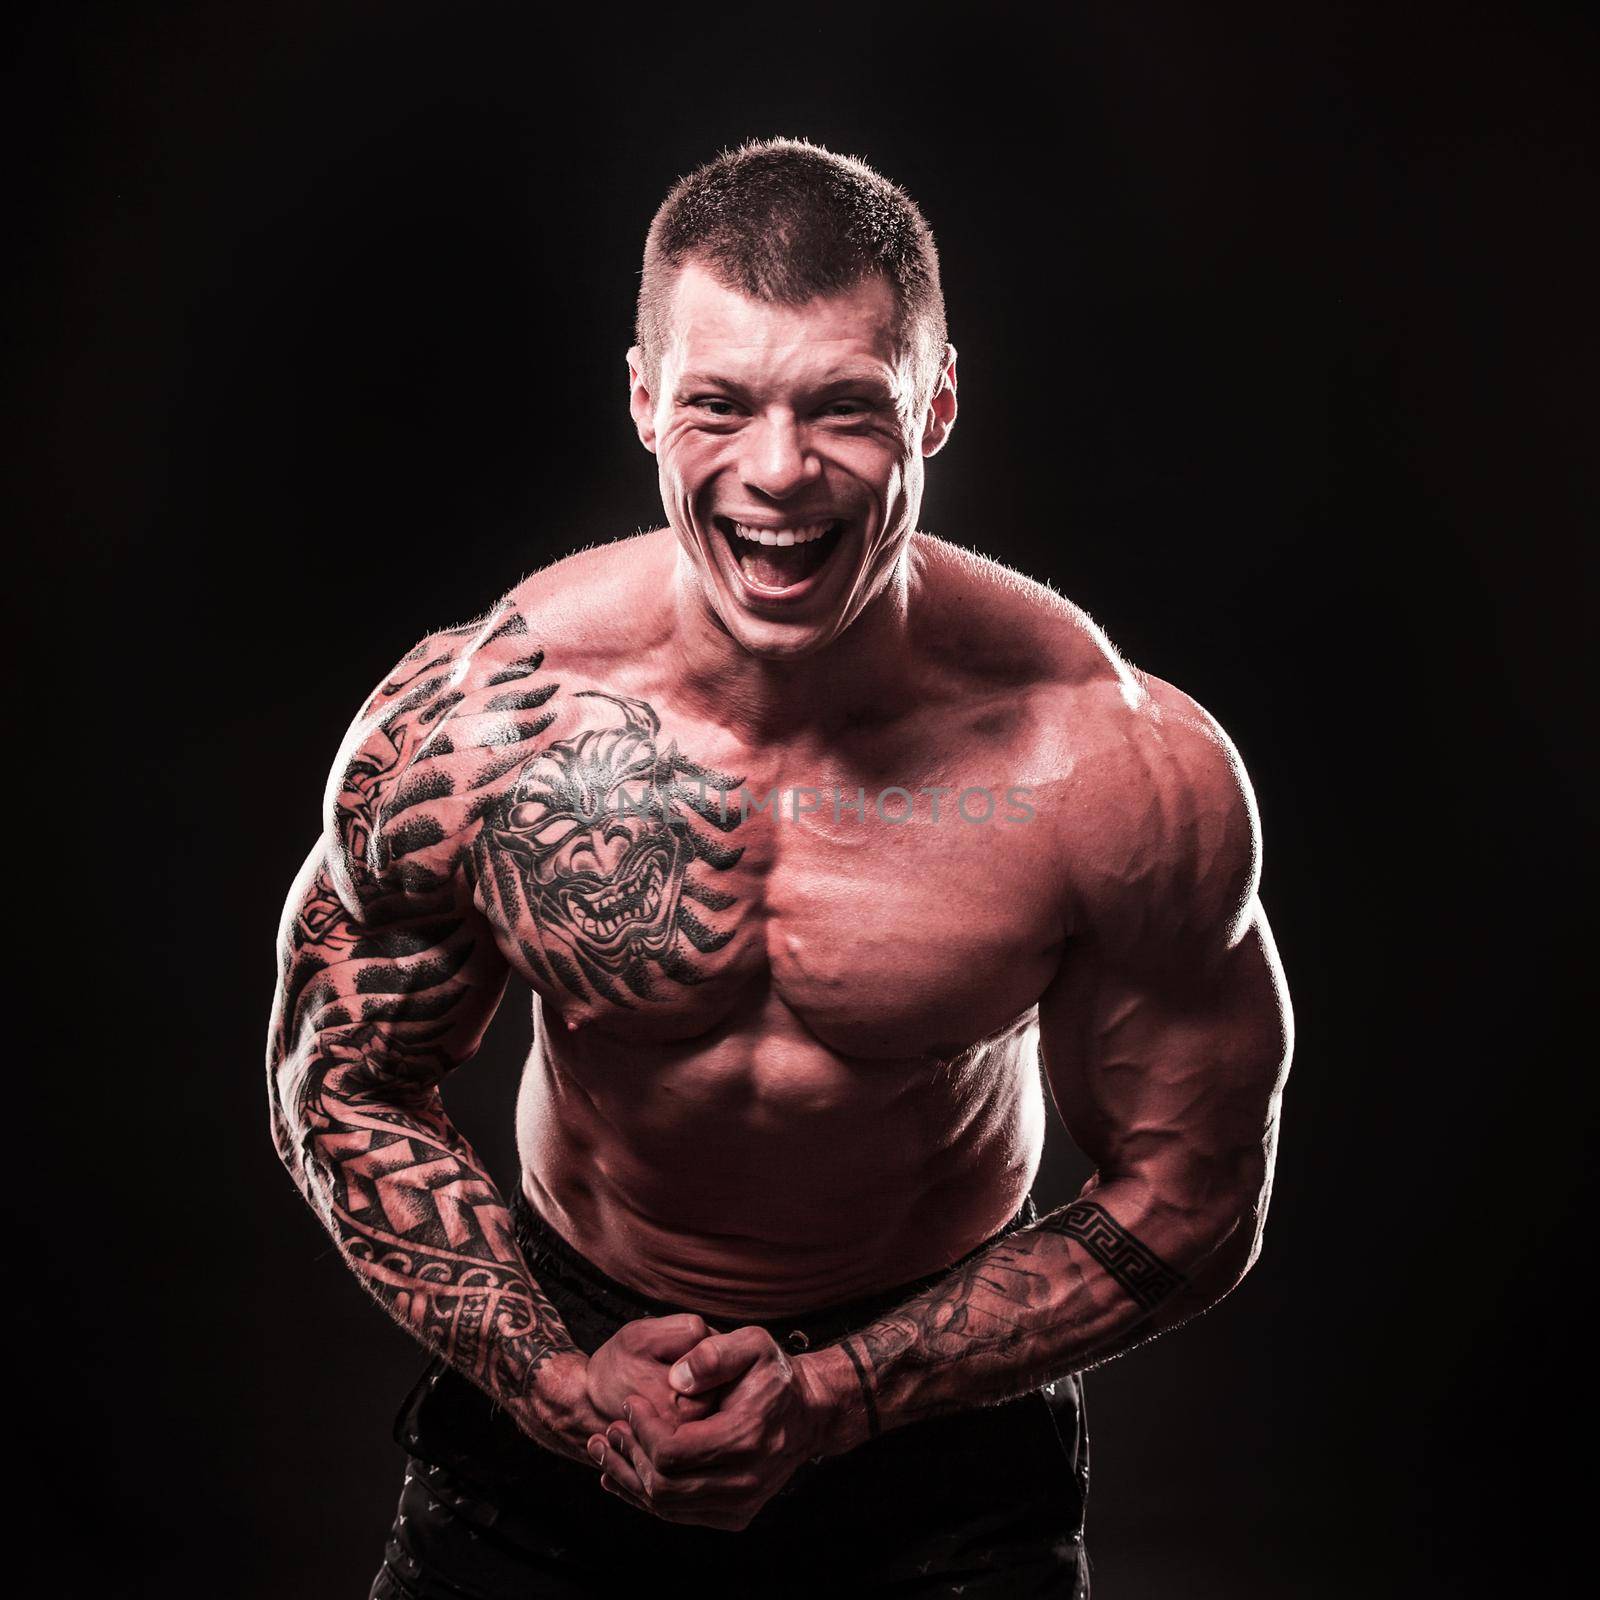 portrait of a cheerful muscular male bodybuilder.isolated on black background